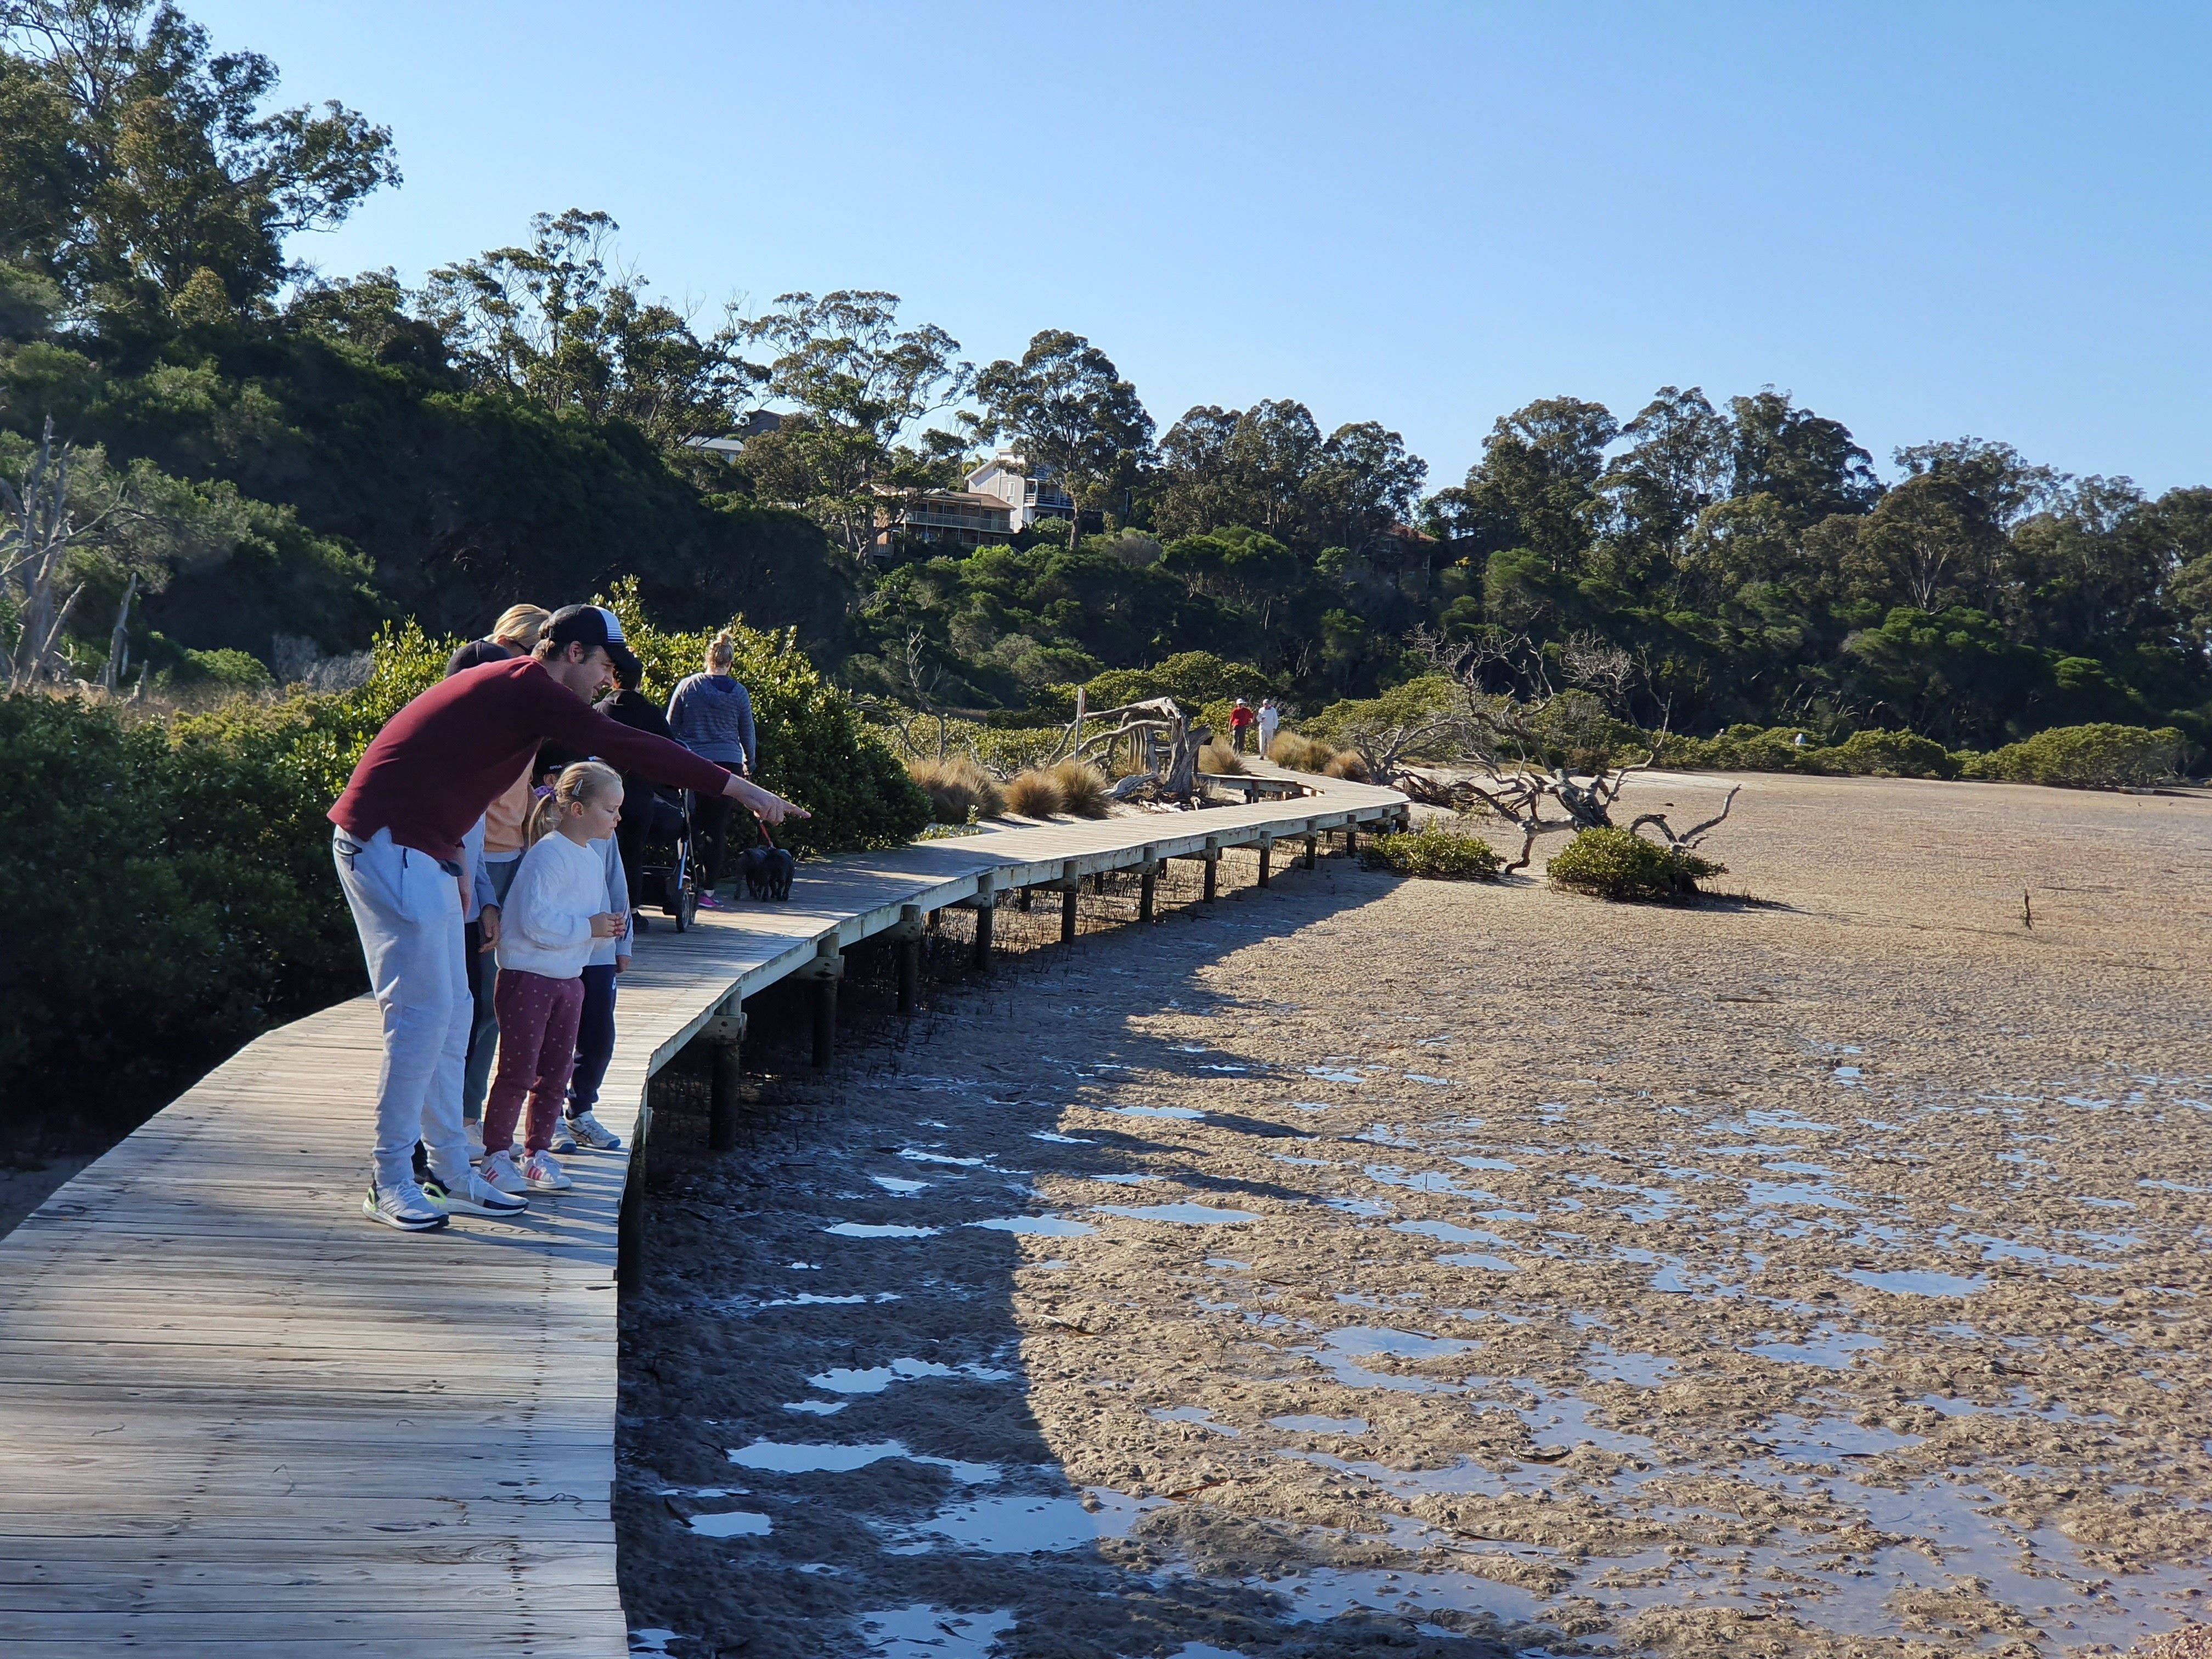 Council adds another plank to the Merimbula Boardwalk renewal project